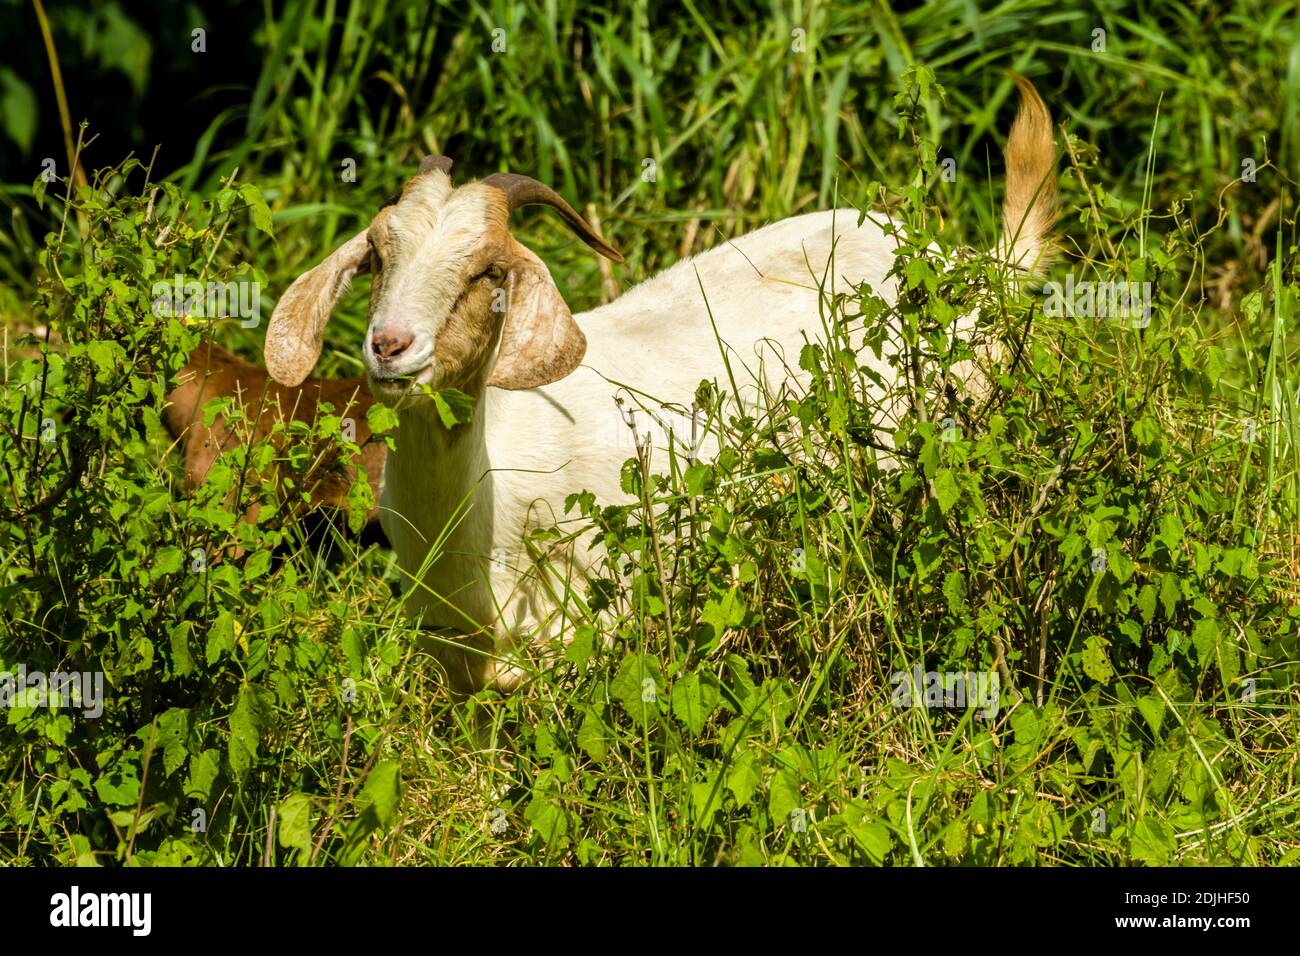 Maui, Hawaii, Upcountry, MauiWine (formerly known as Tedeshi Winery), Goats Stock Photo